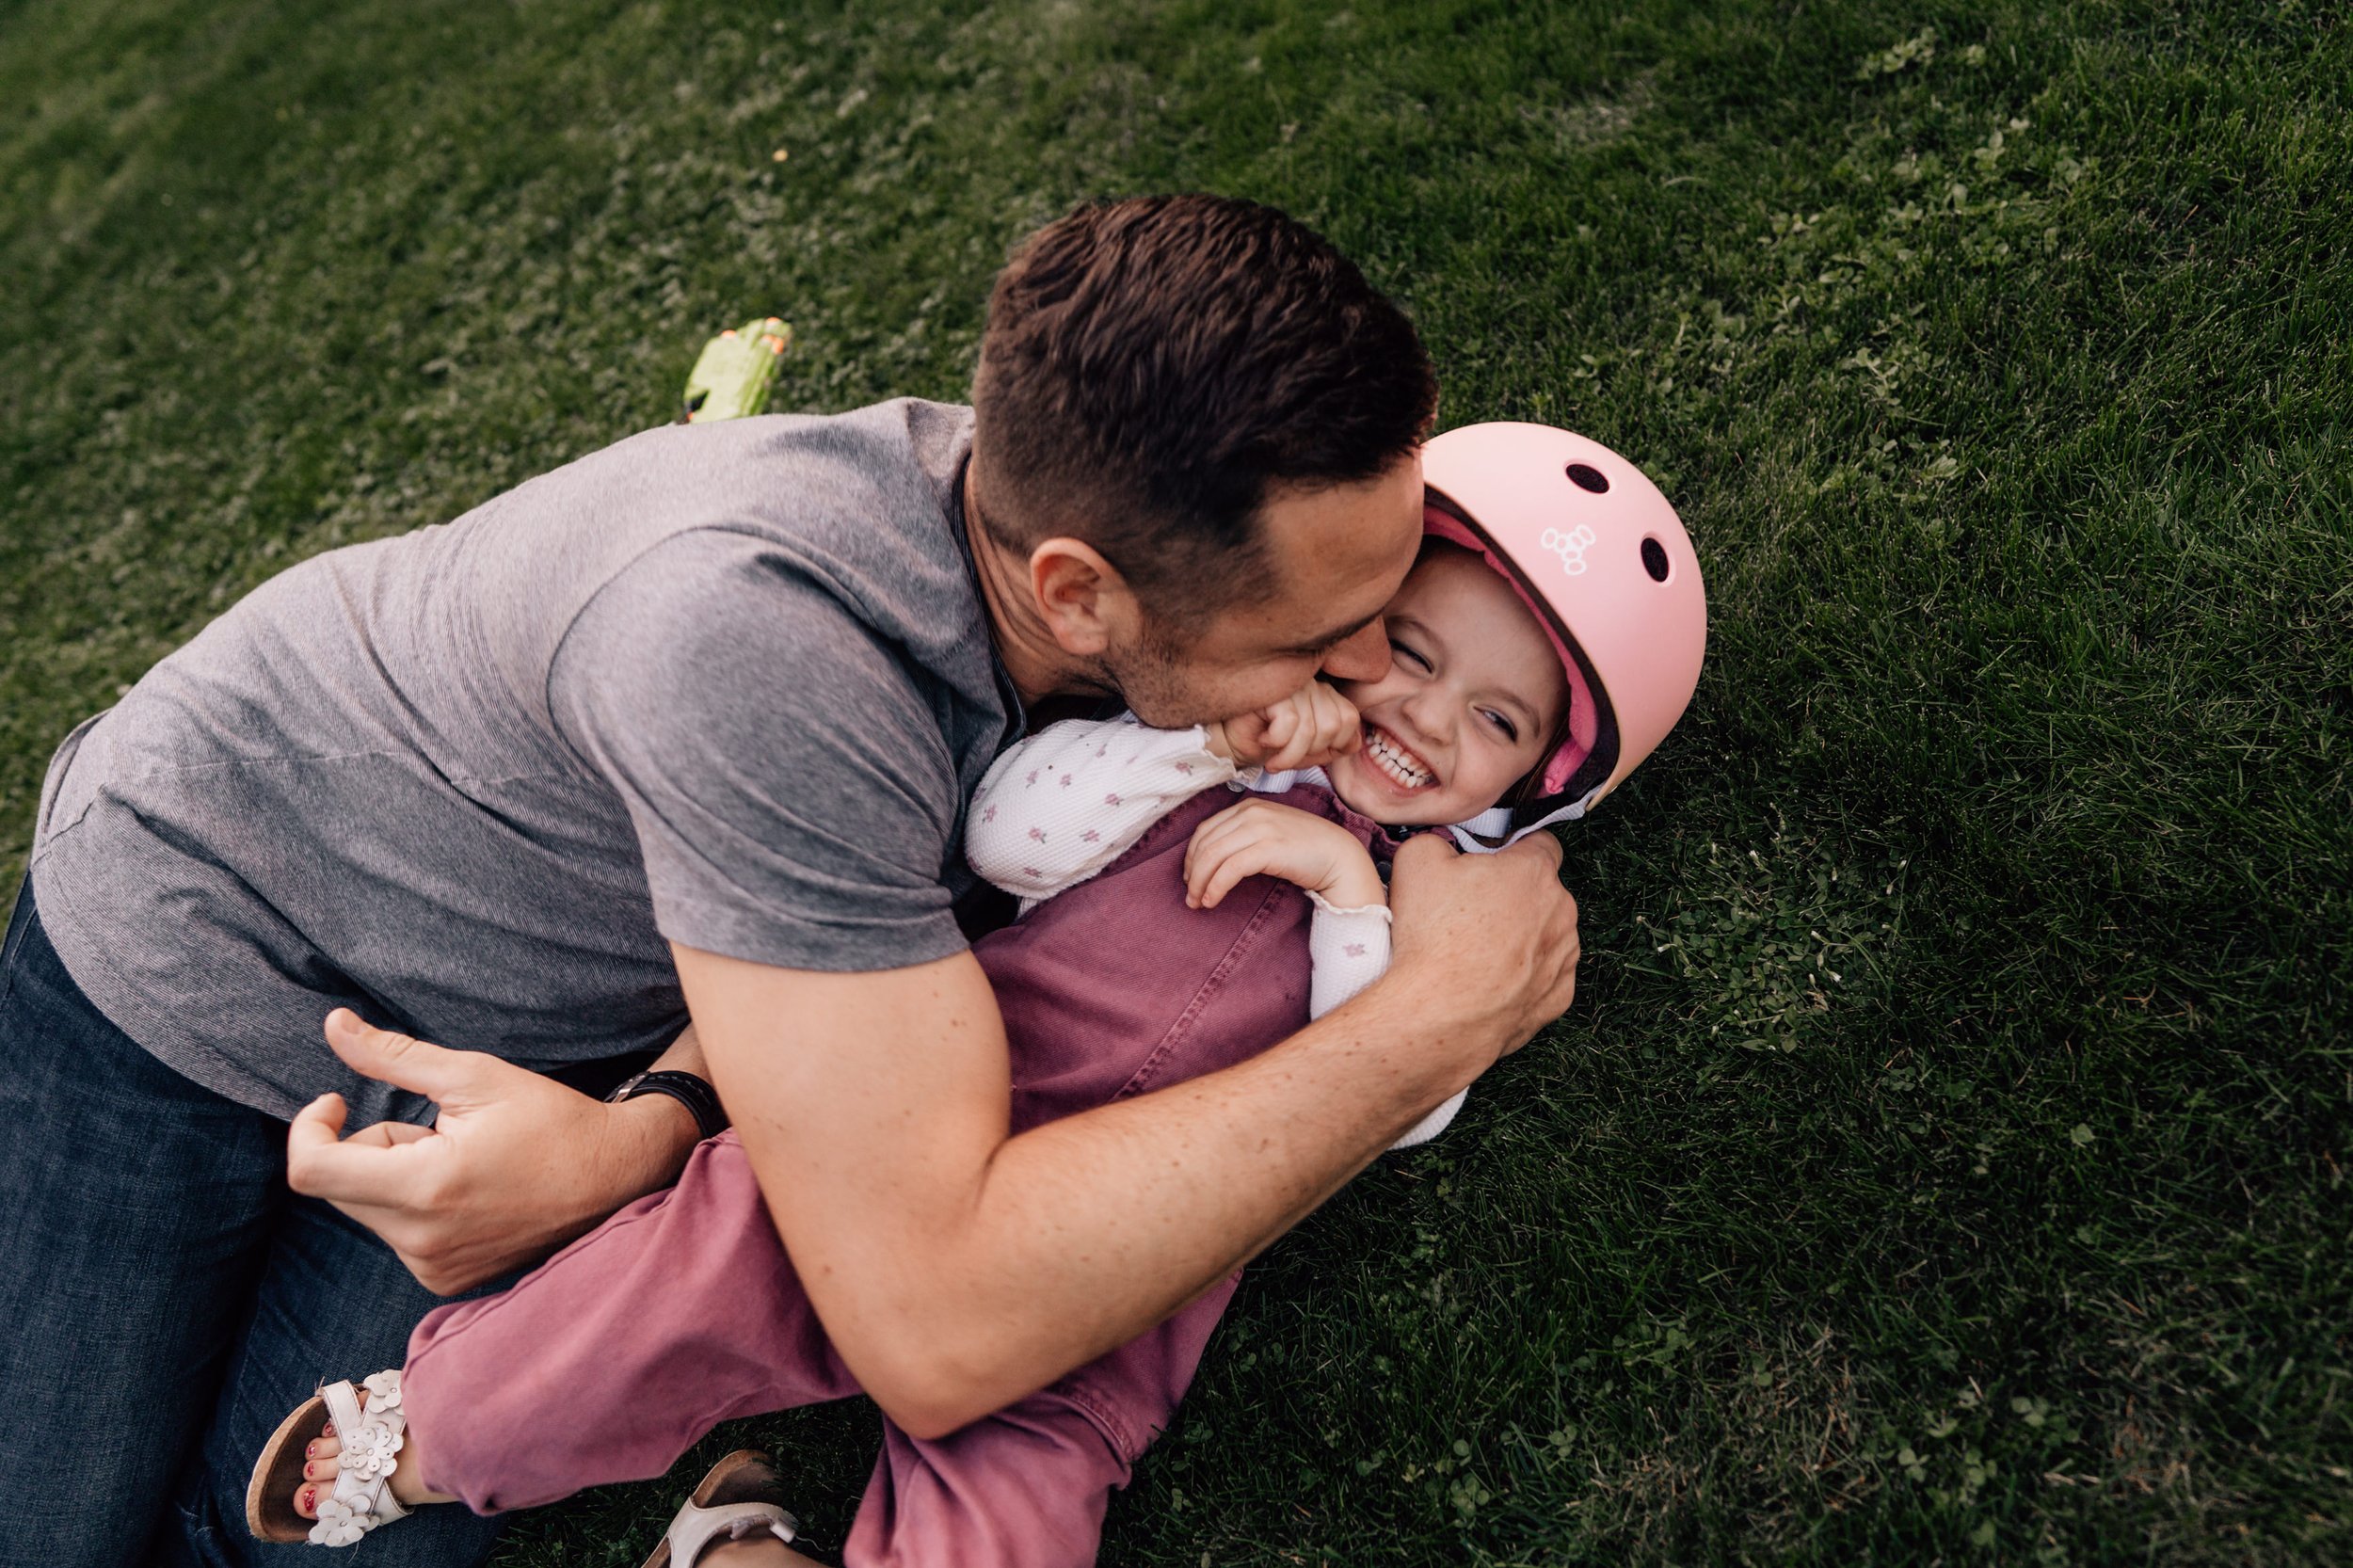 dad kissing young daughter while she laughs in the grass